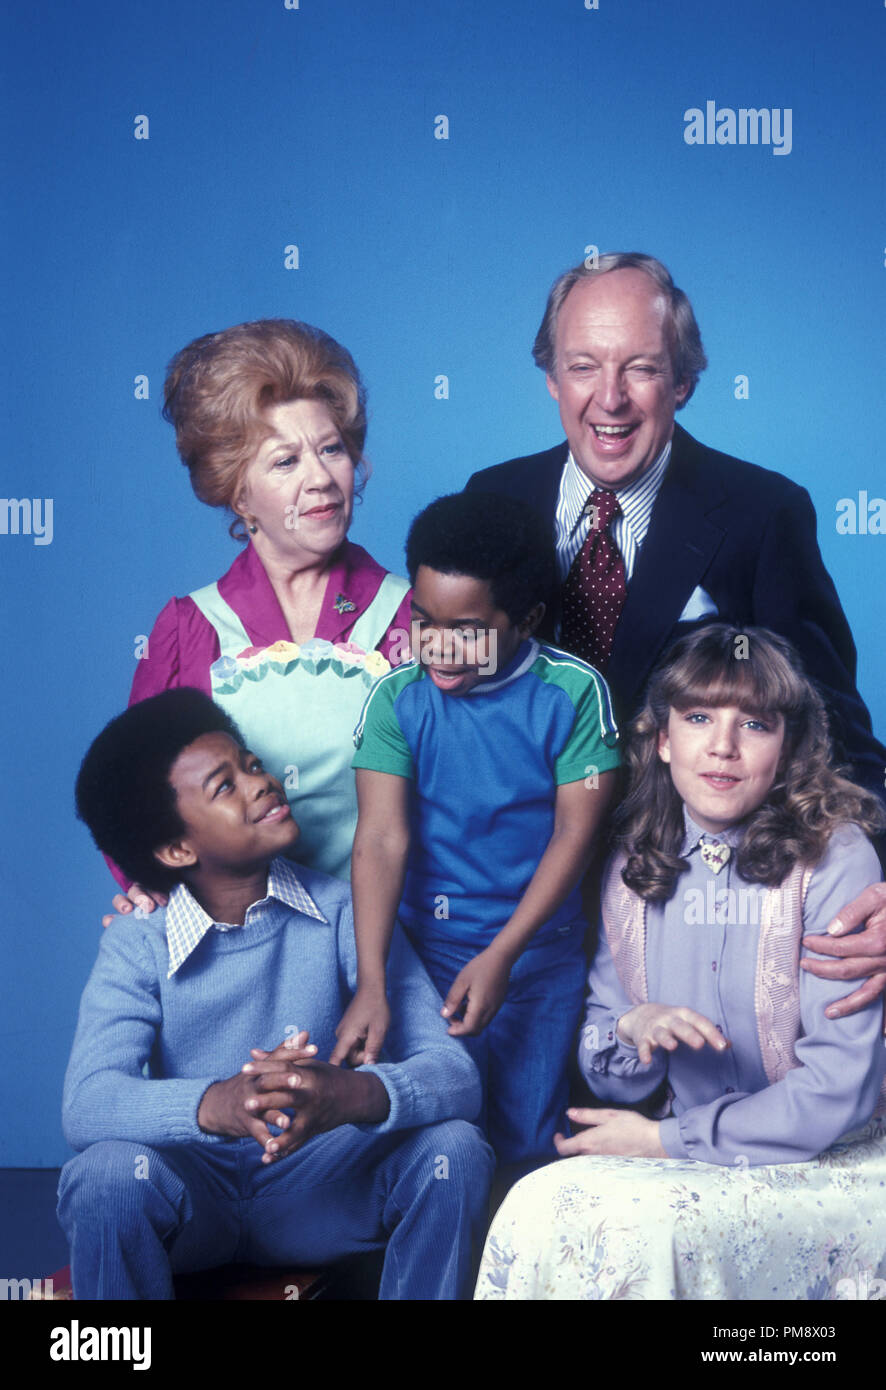 Studio Publicity Still from 'Diff'rent Strokes' Todd Bridegs, Gary Coleman, Conrad Bain, Dana Plato, Charlotte Rae 1979 All Rights Reserved  File Reference # 31718141THA  For Editorial Use Only Stock Photo